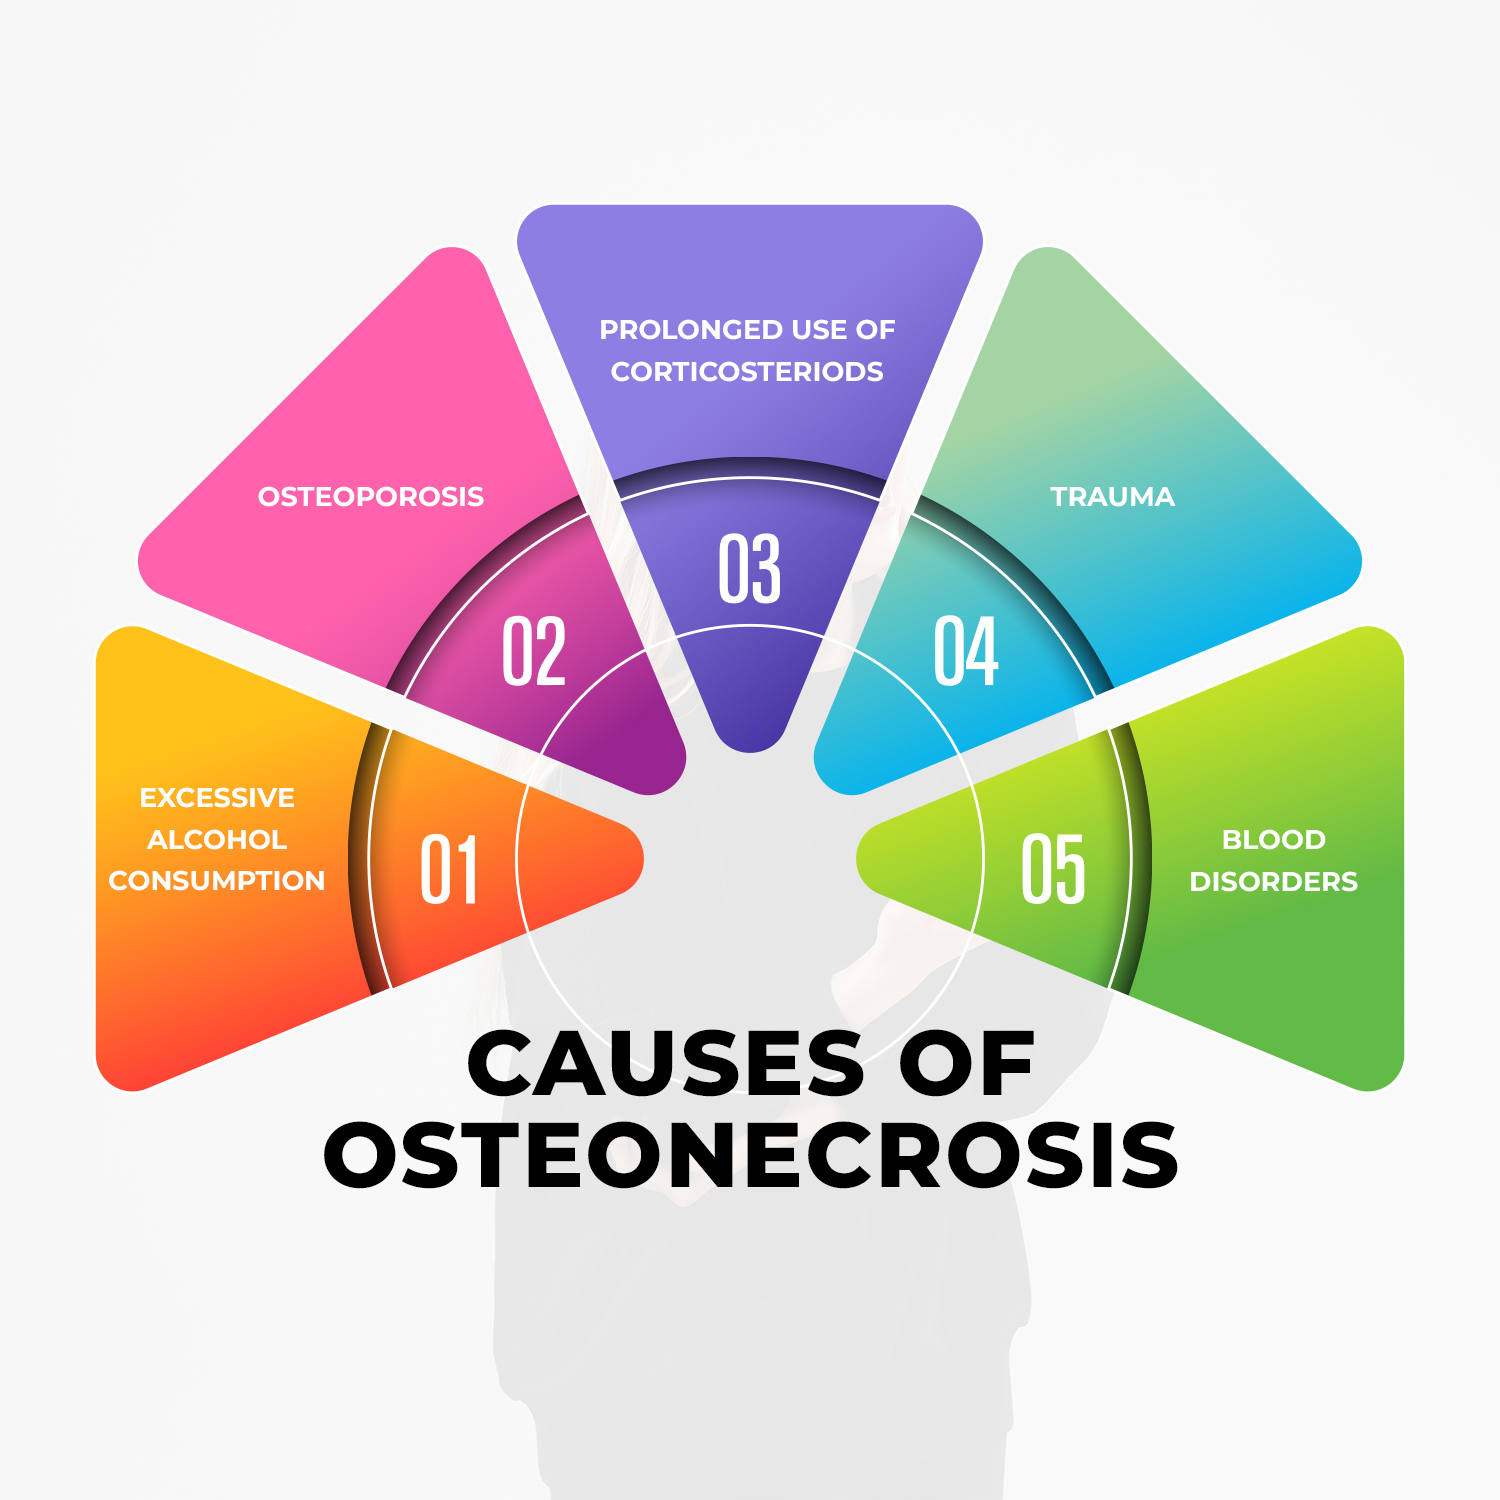 Causes and Risk Factors of Osteonecrosis